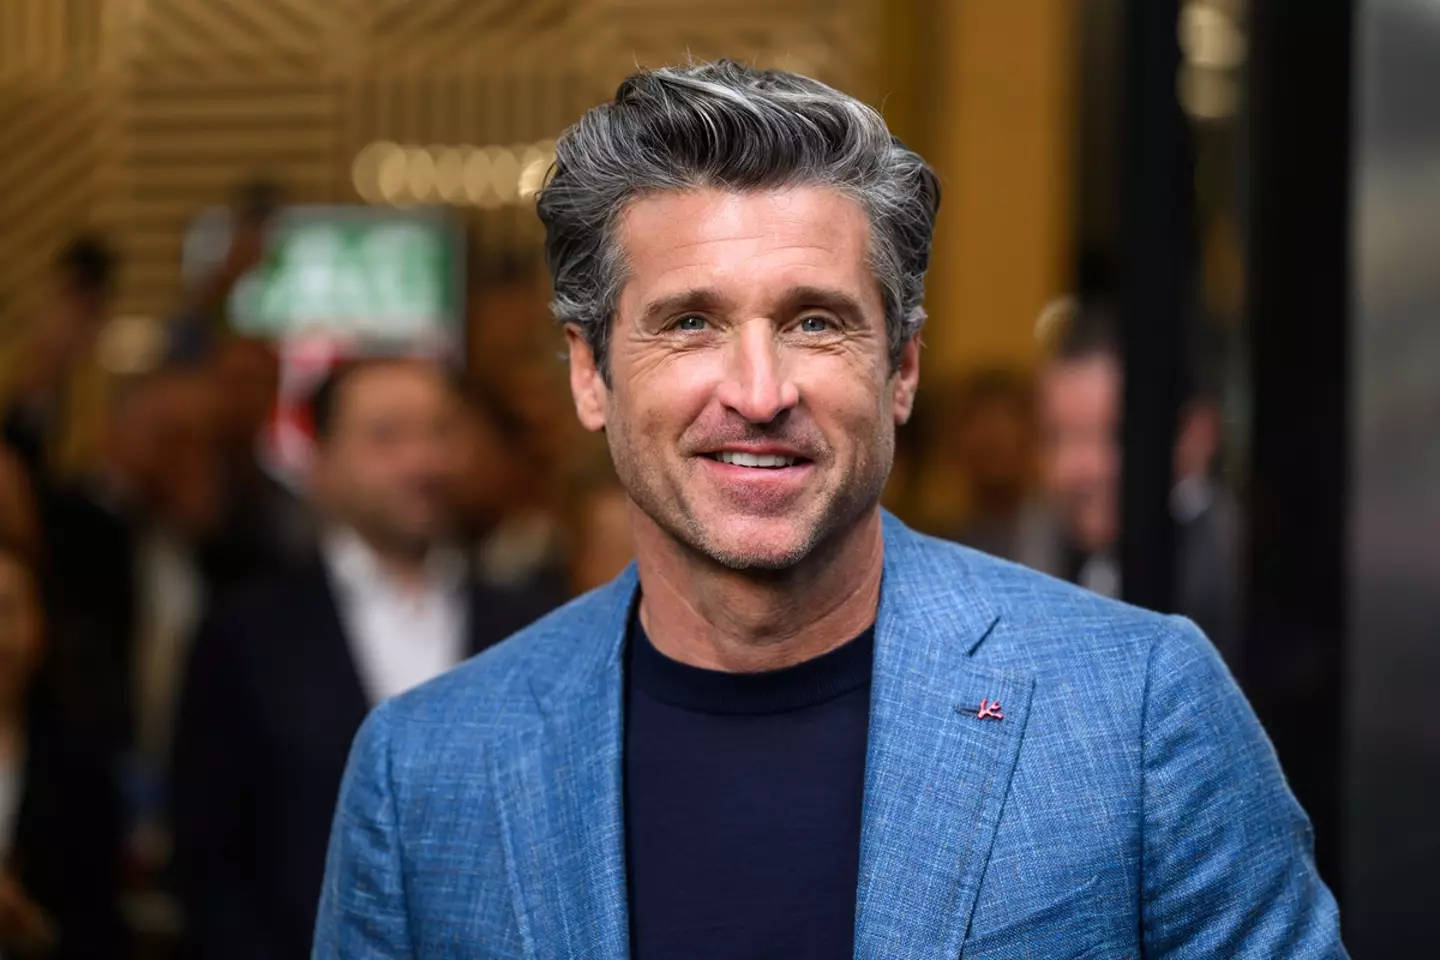 Patrick Dempsey is set to star in a brand-new series. (James Gourley/Getty Images)